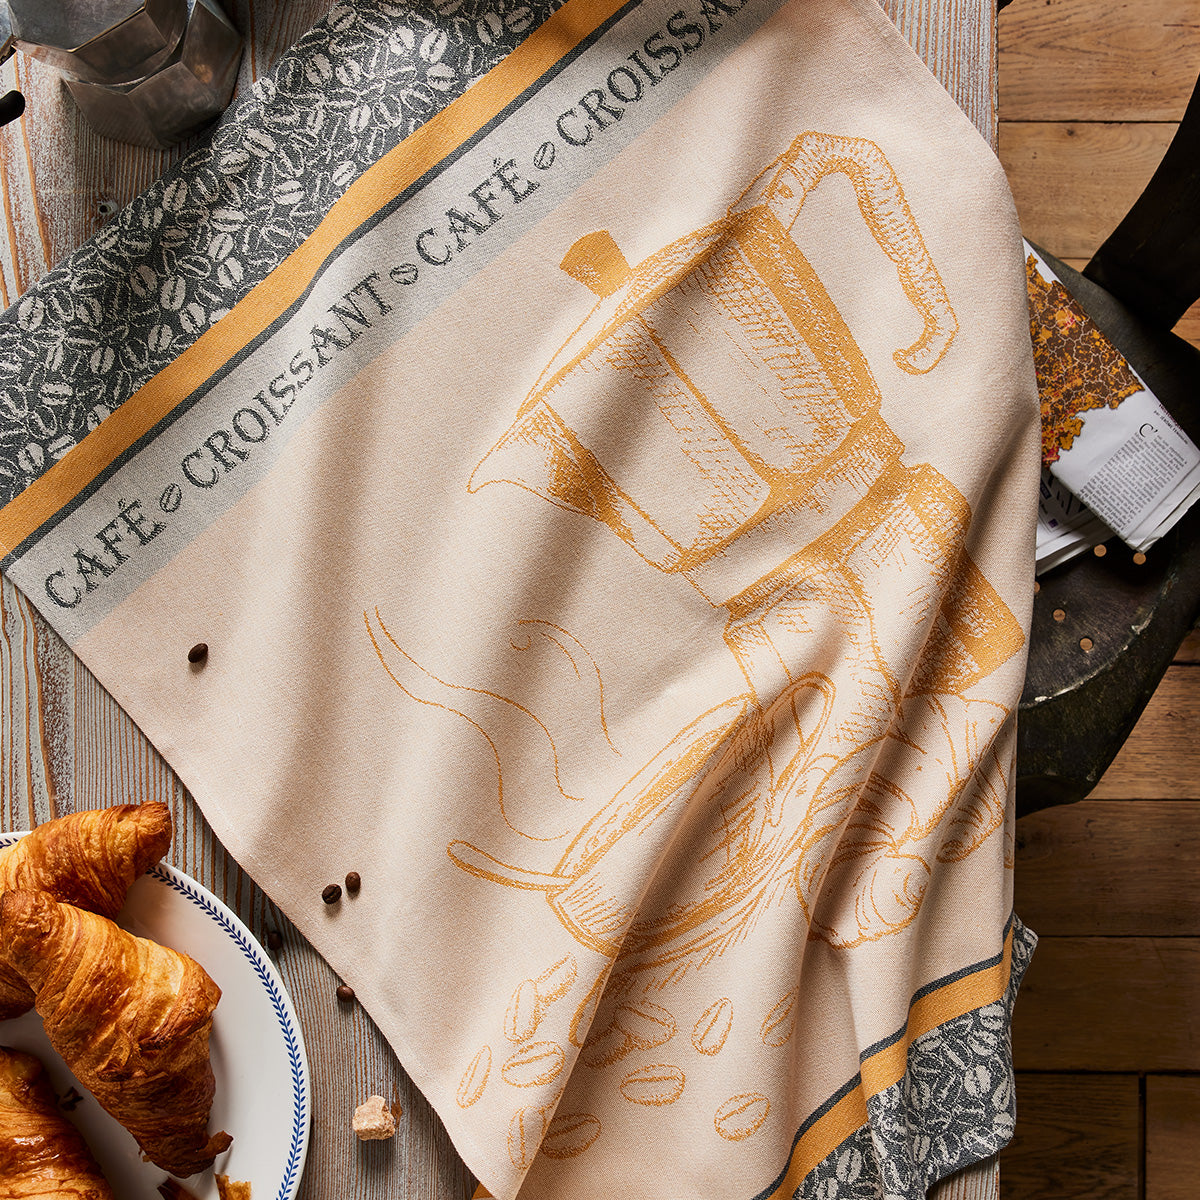 Let's start the day with coffee and croissant... if you love this breakfast, make this yellow/gray tea towel yours. A very stylish way to add a French feel to your kitchen.